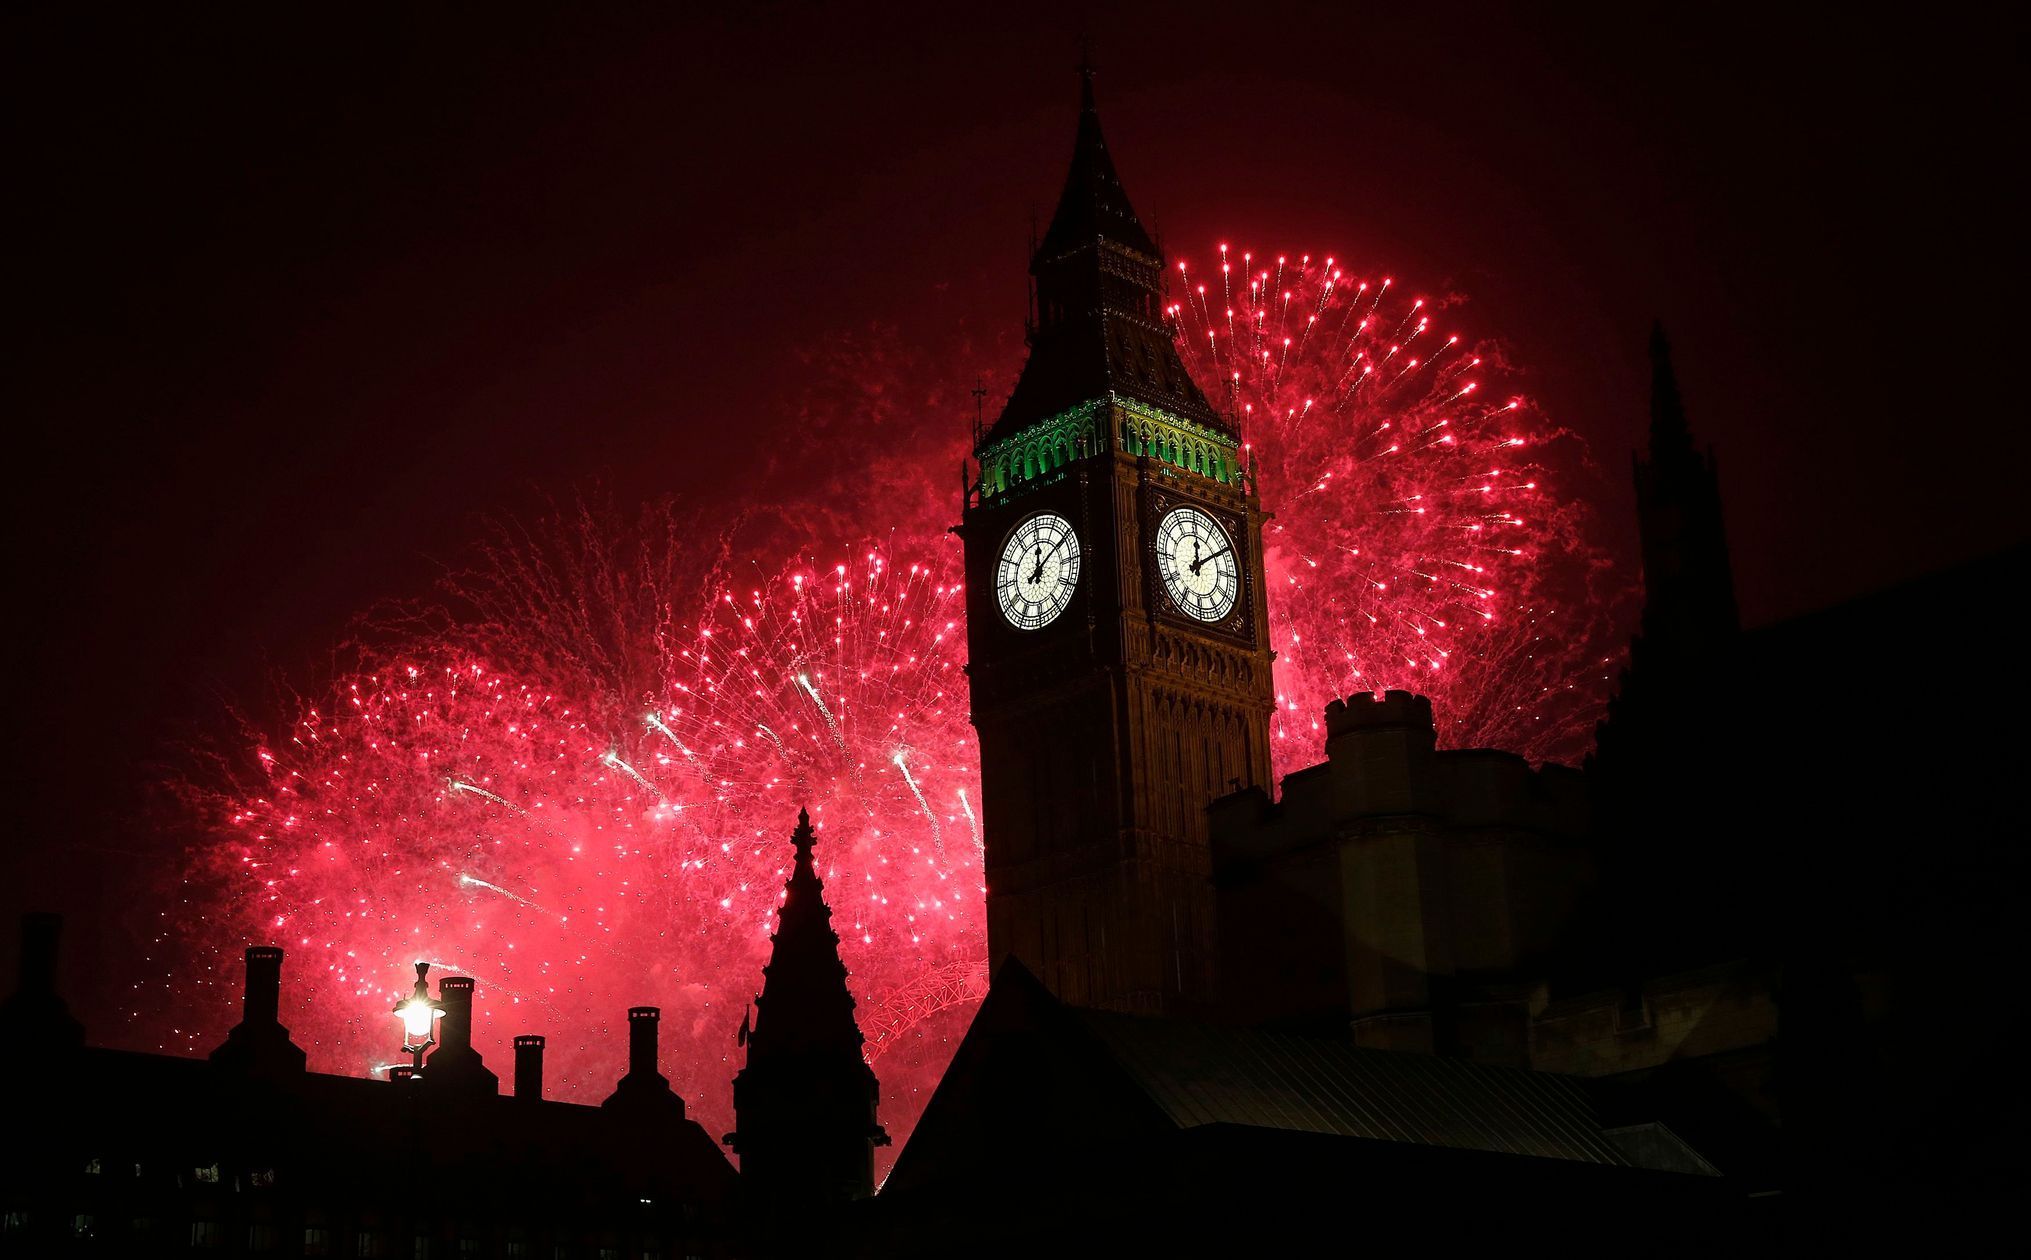 Fireworks explode behind the Houses of Parliament and Big Ben on the River Thames during New Year's celebrations in London